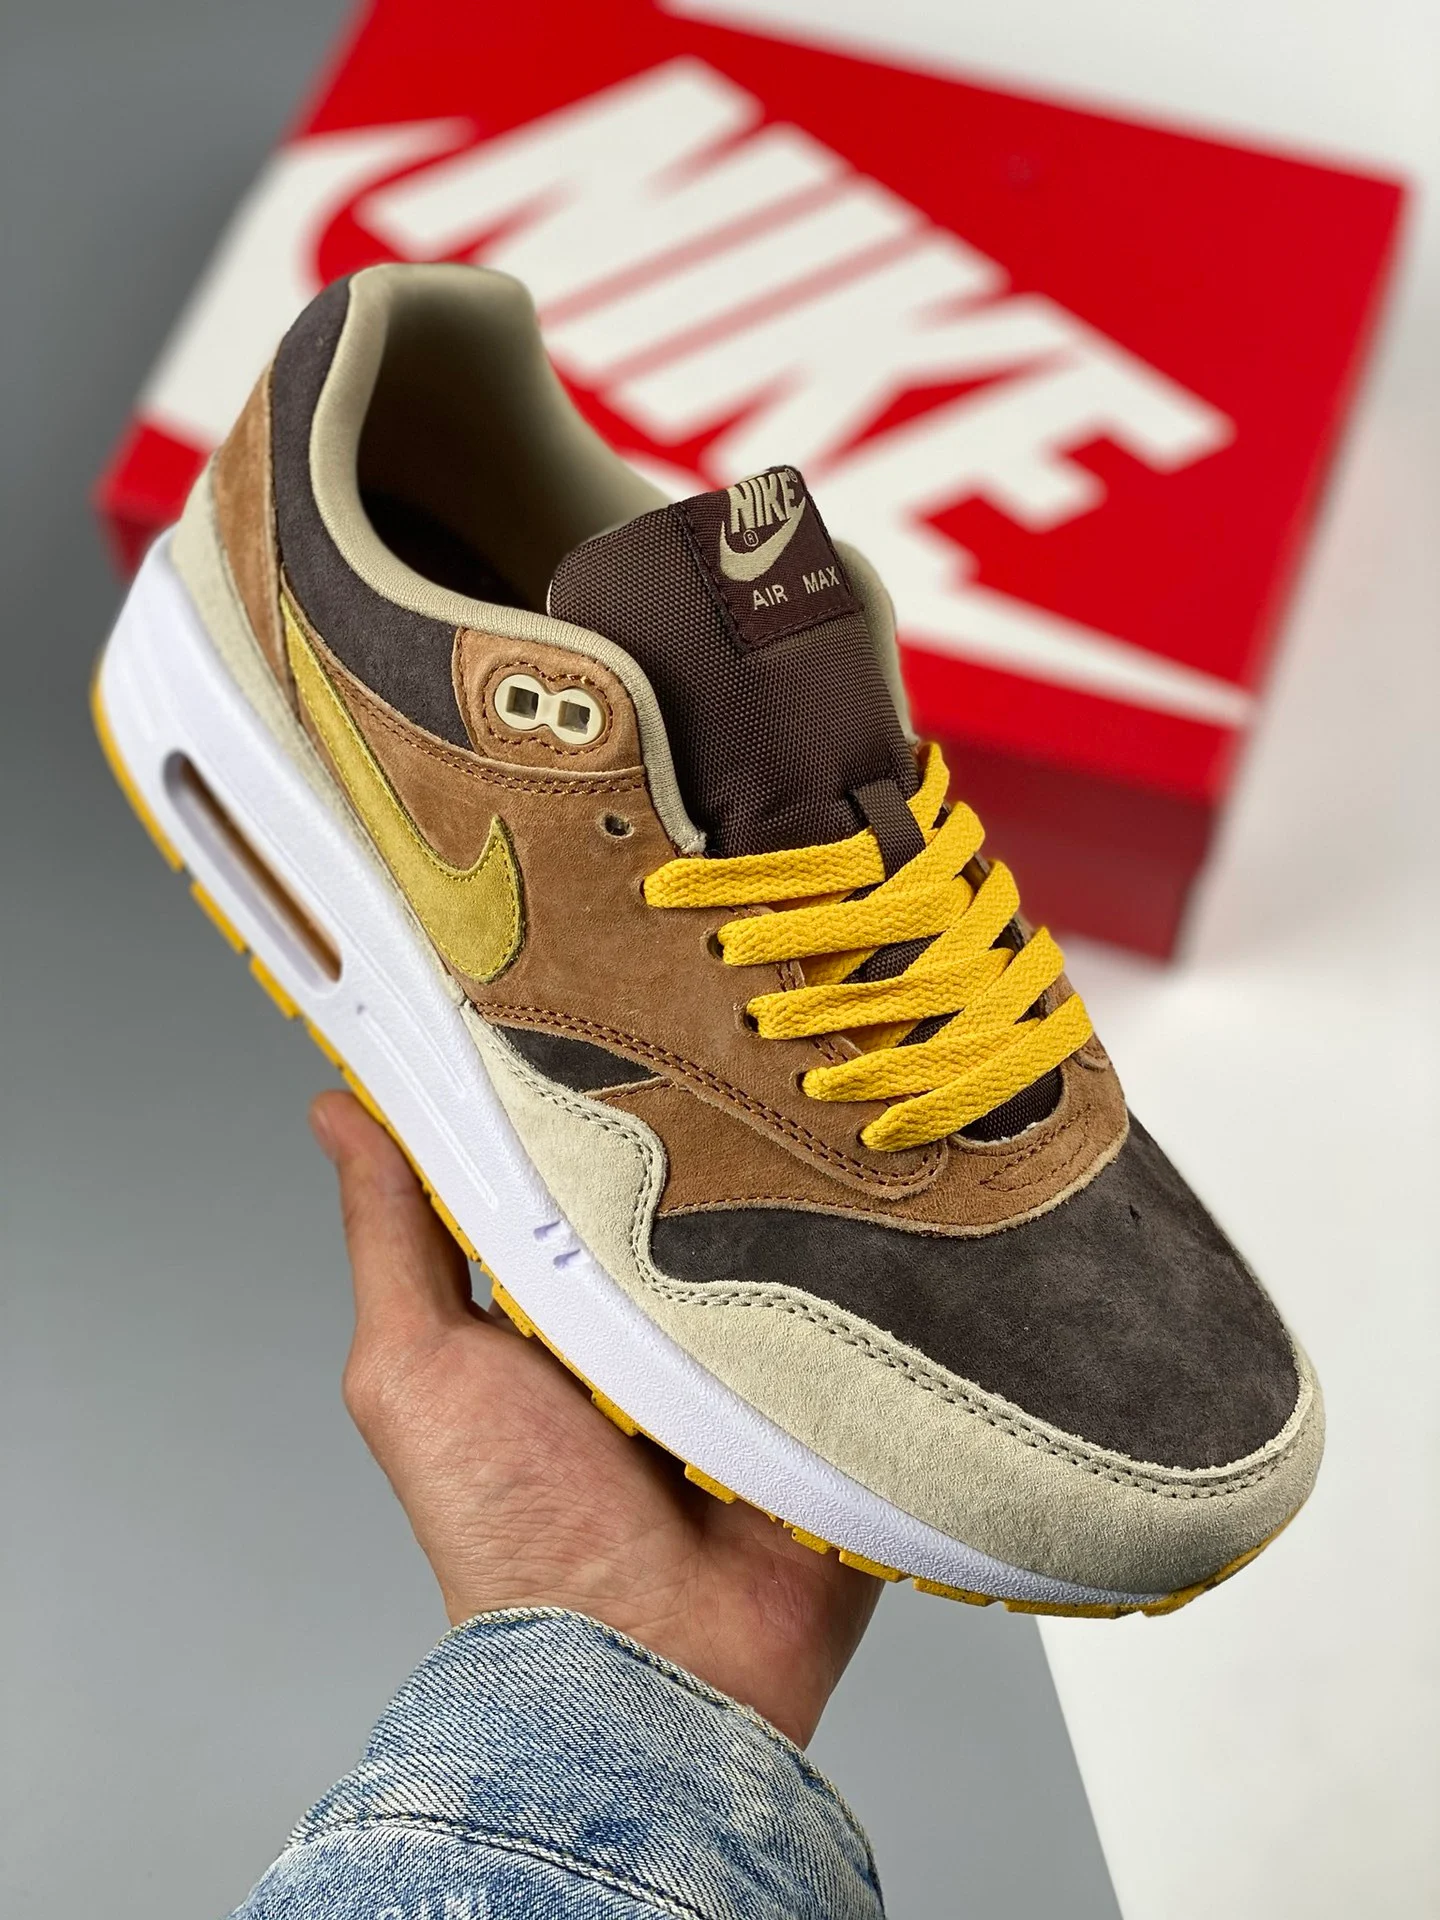 Nike Air Max 1 Ugly Duckling Pecan Yellow Ochre-Brown DZ0482-200 For Sale